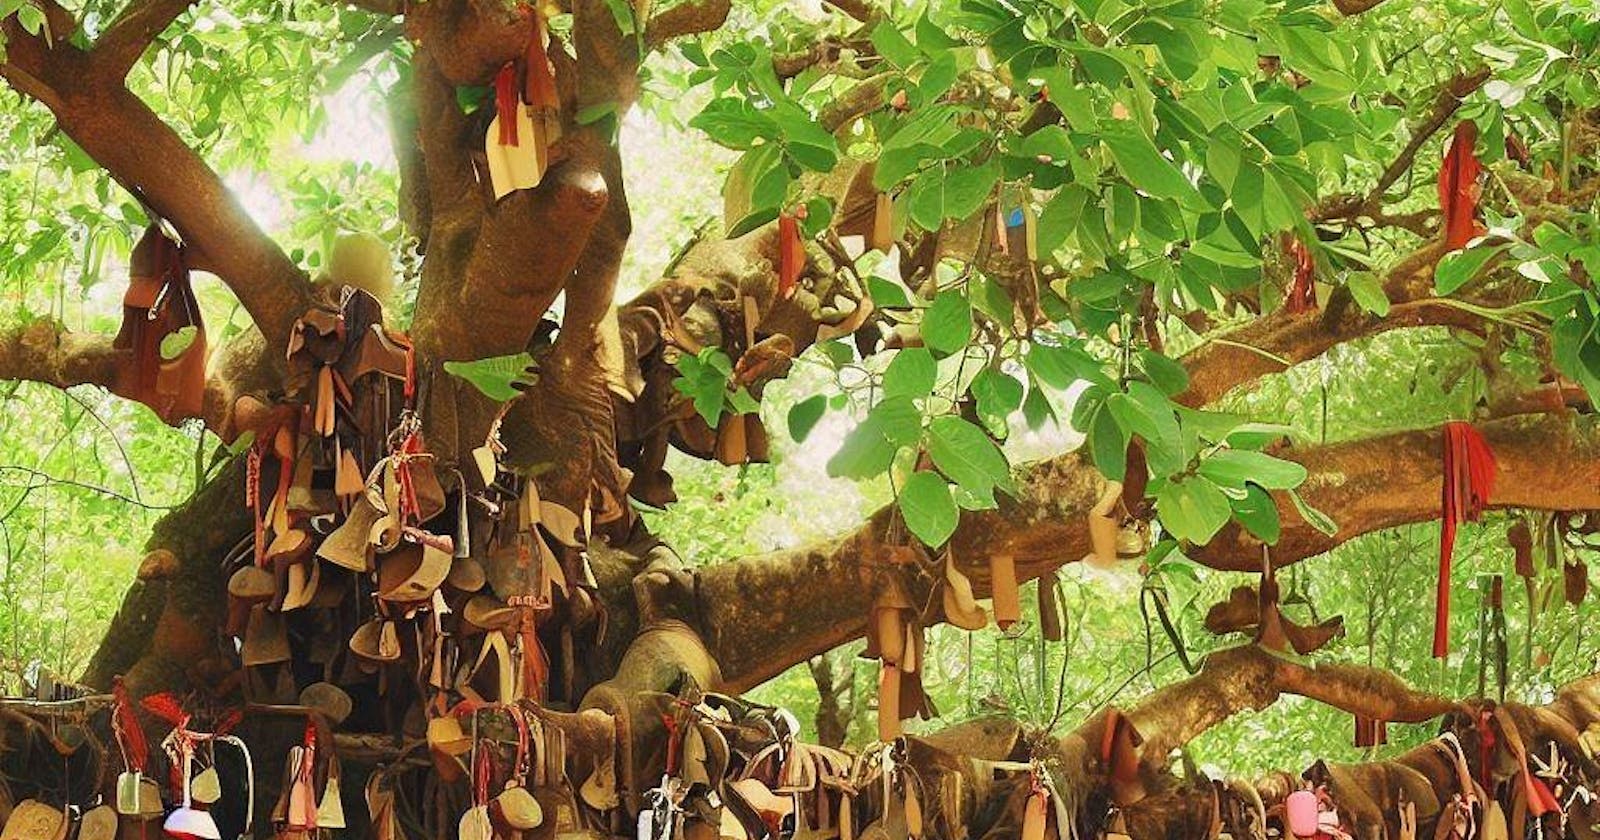 Wishing Tree: A Cure for All Diseases in the World